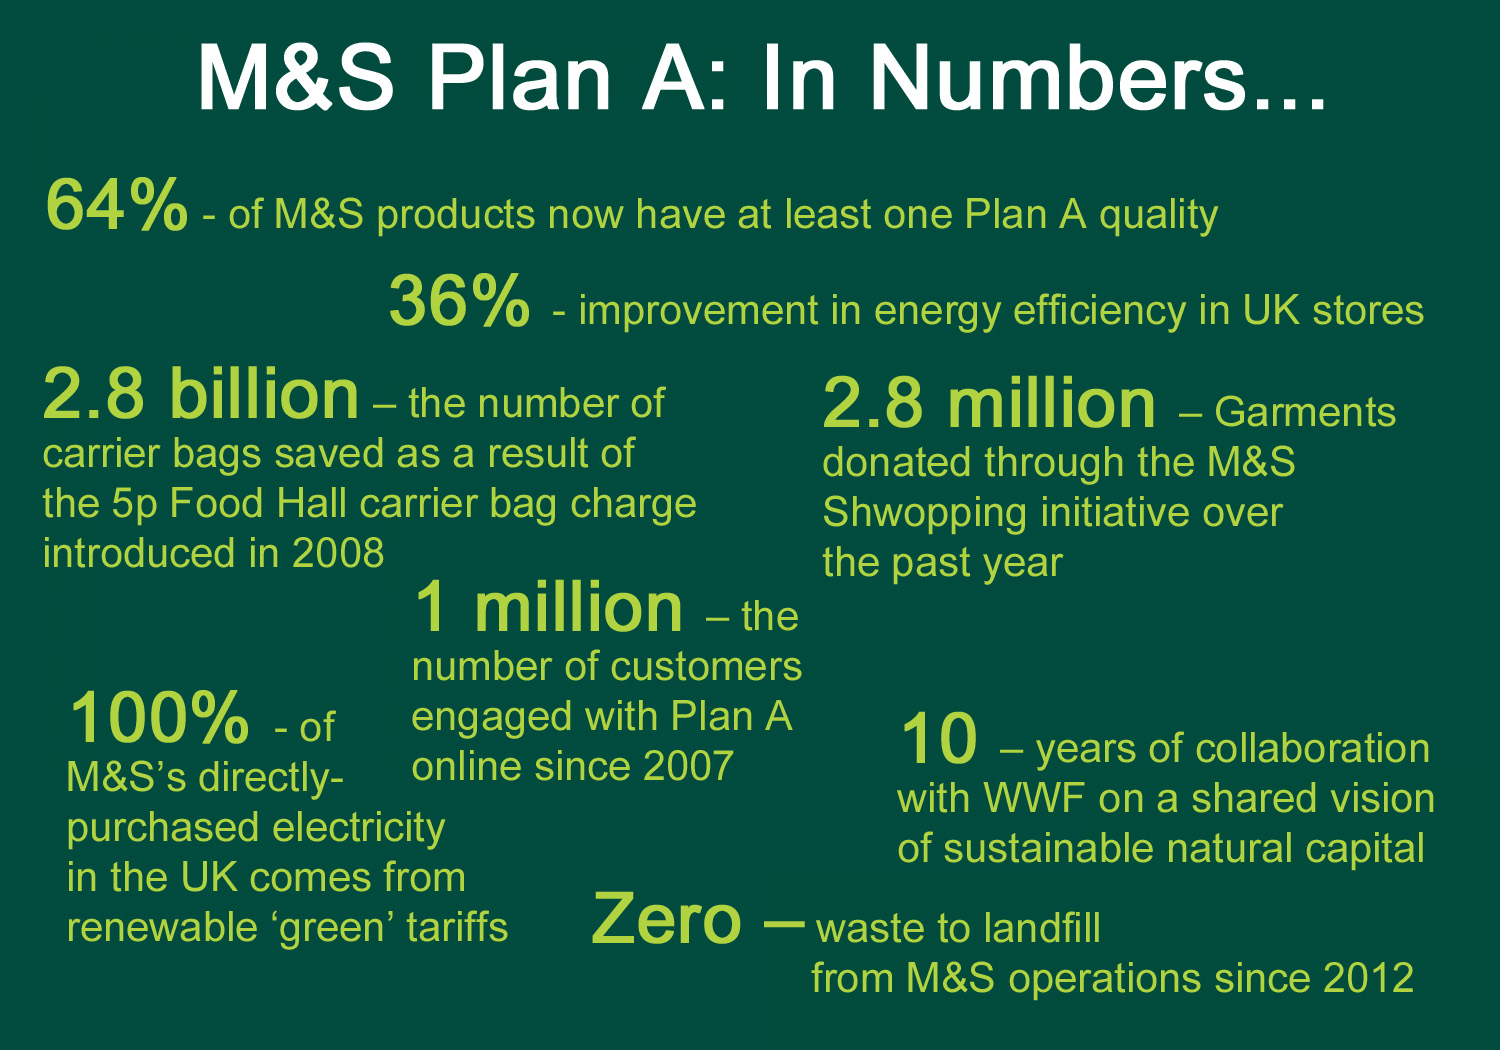 Marks and spencers business plan